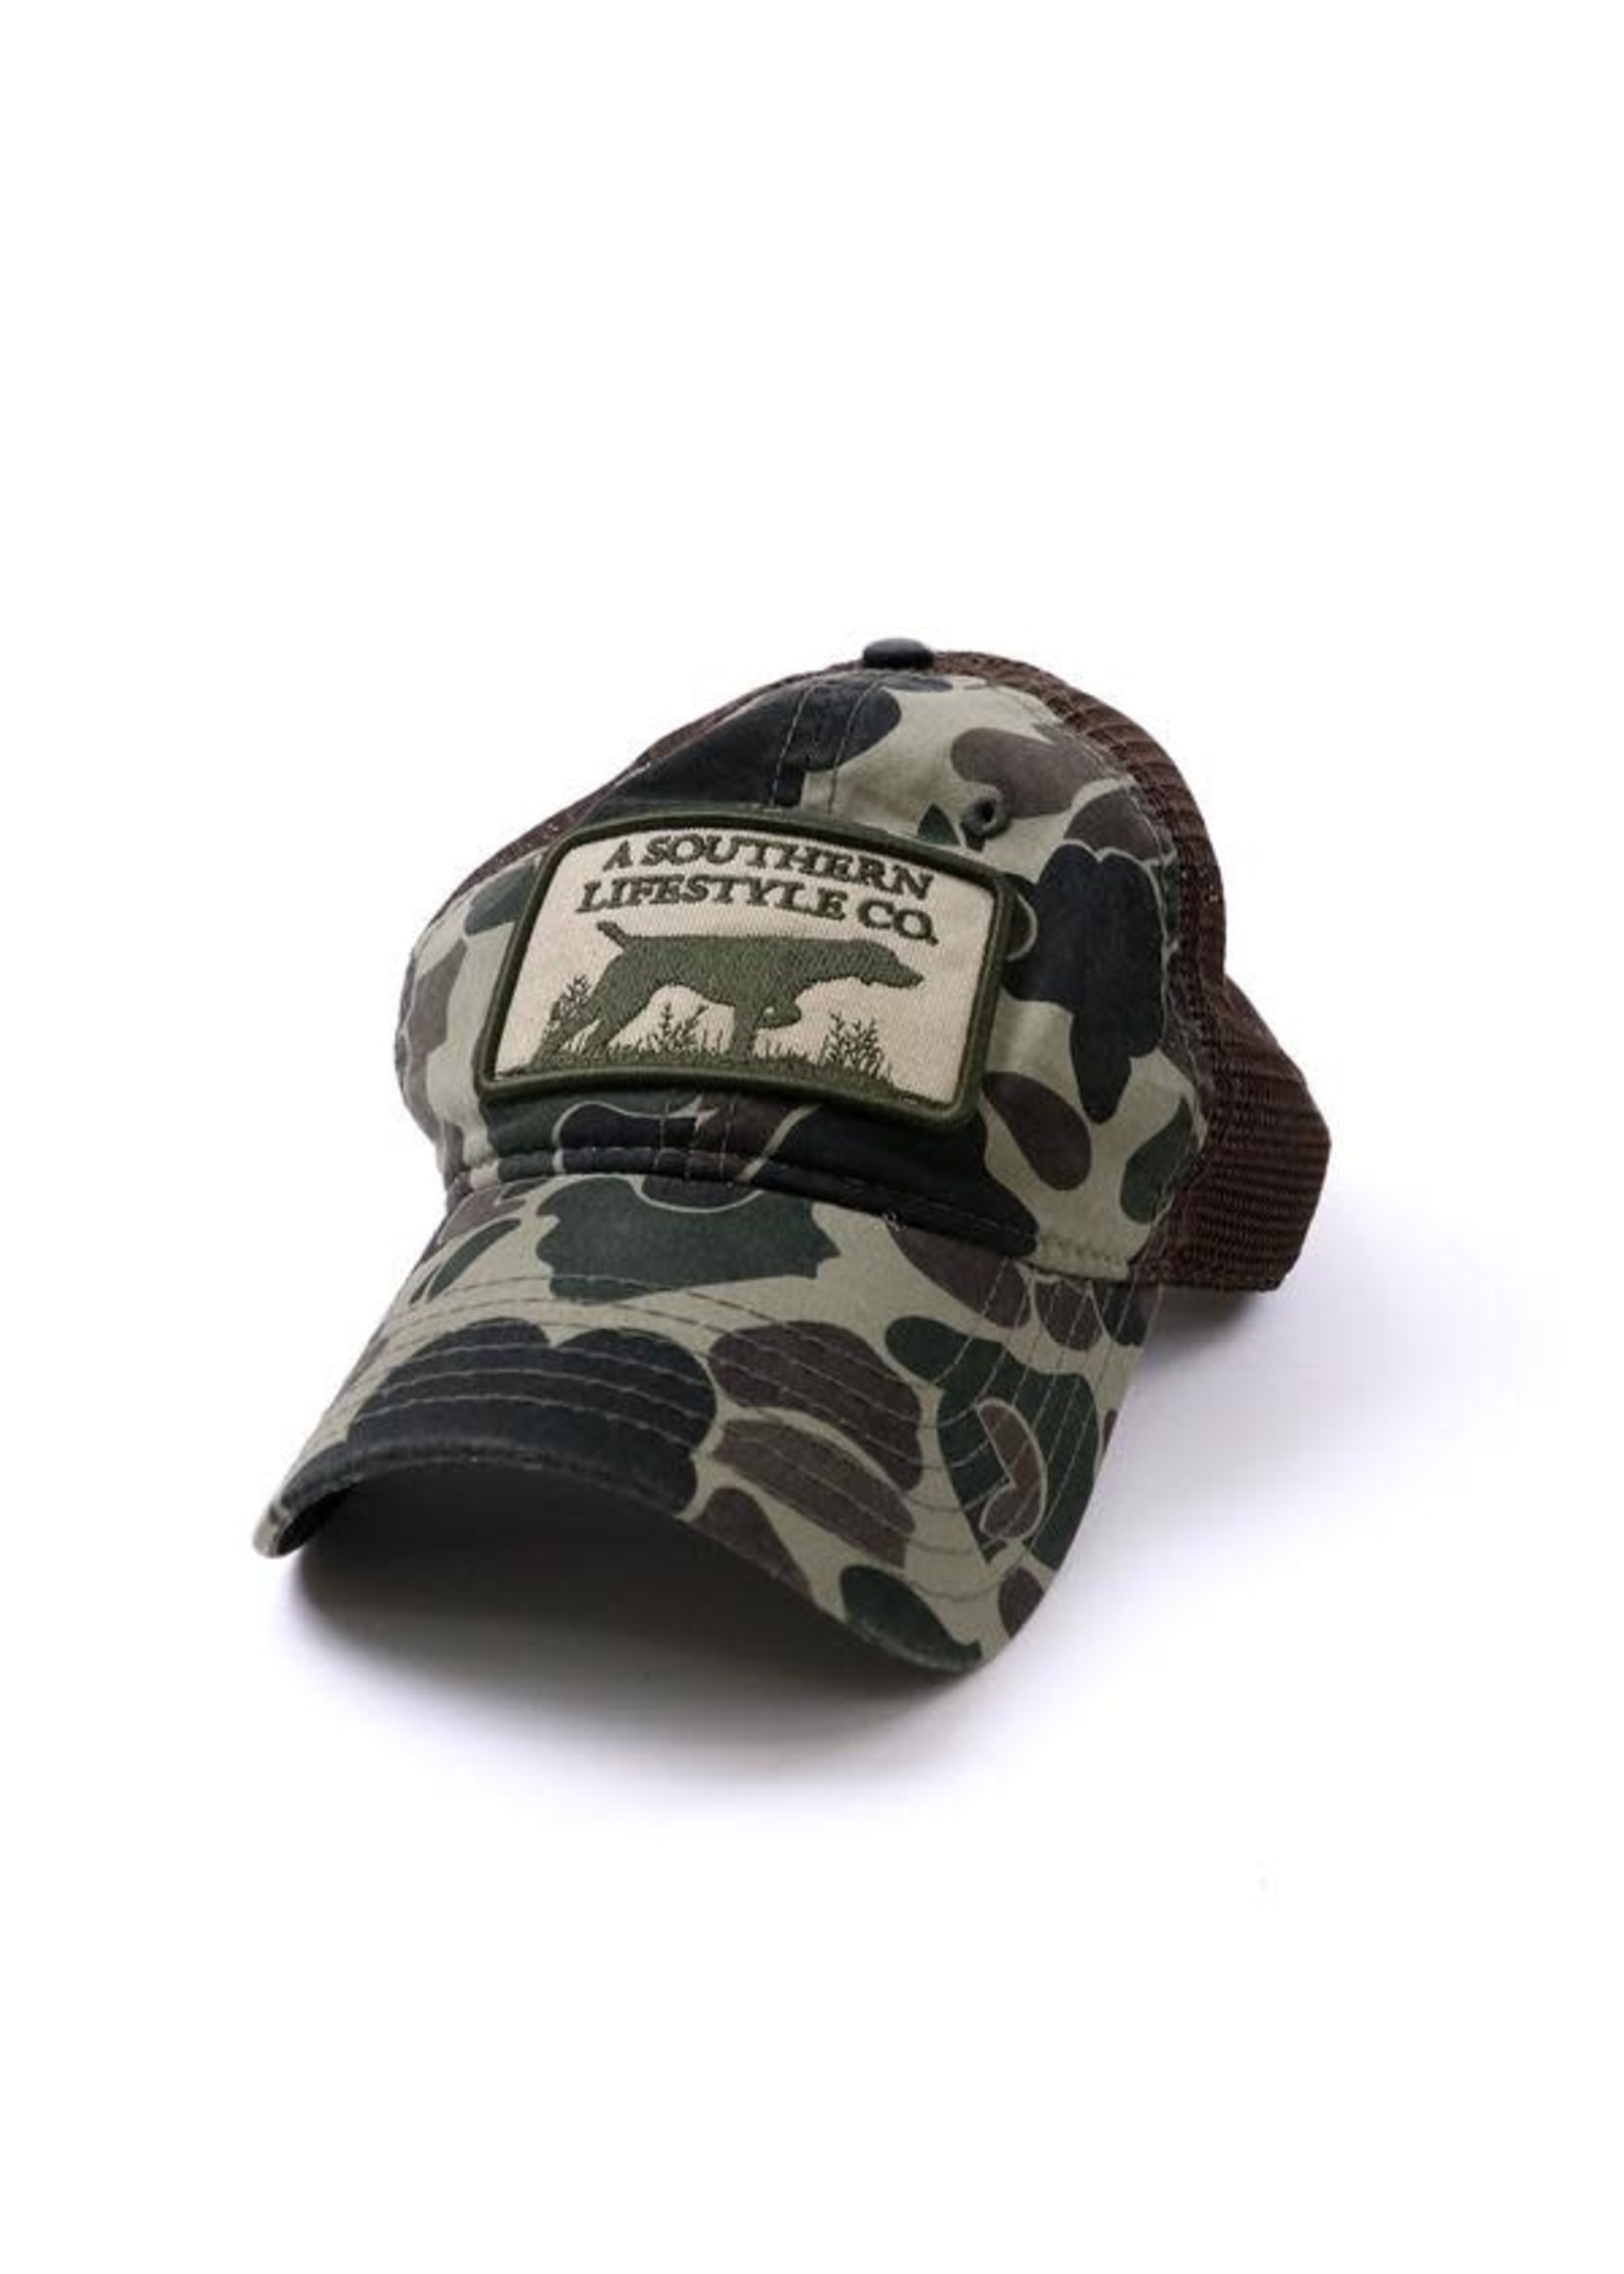 A Southern Lifestyle Company On Point Patch Hat Green Camo